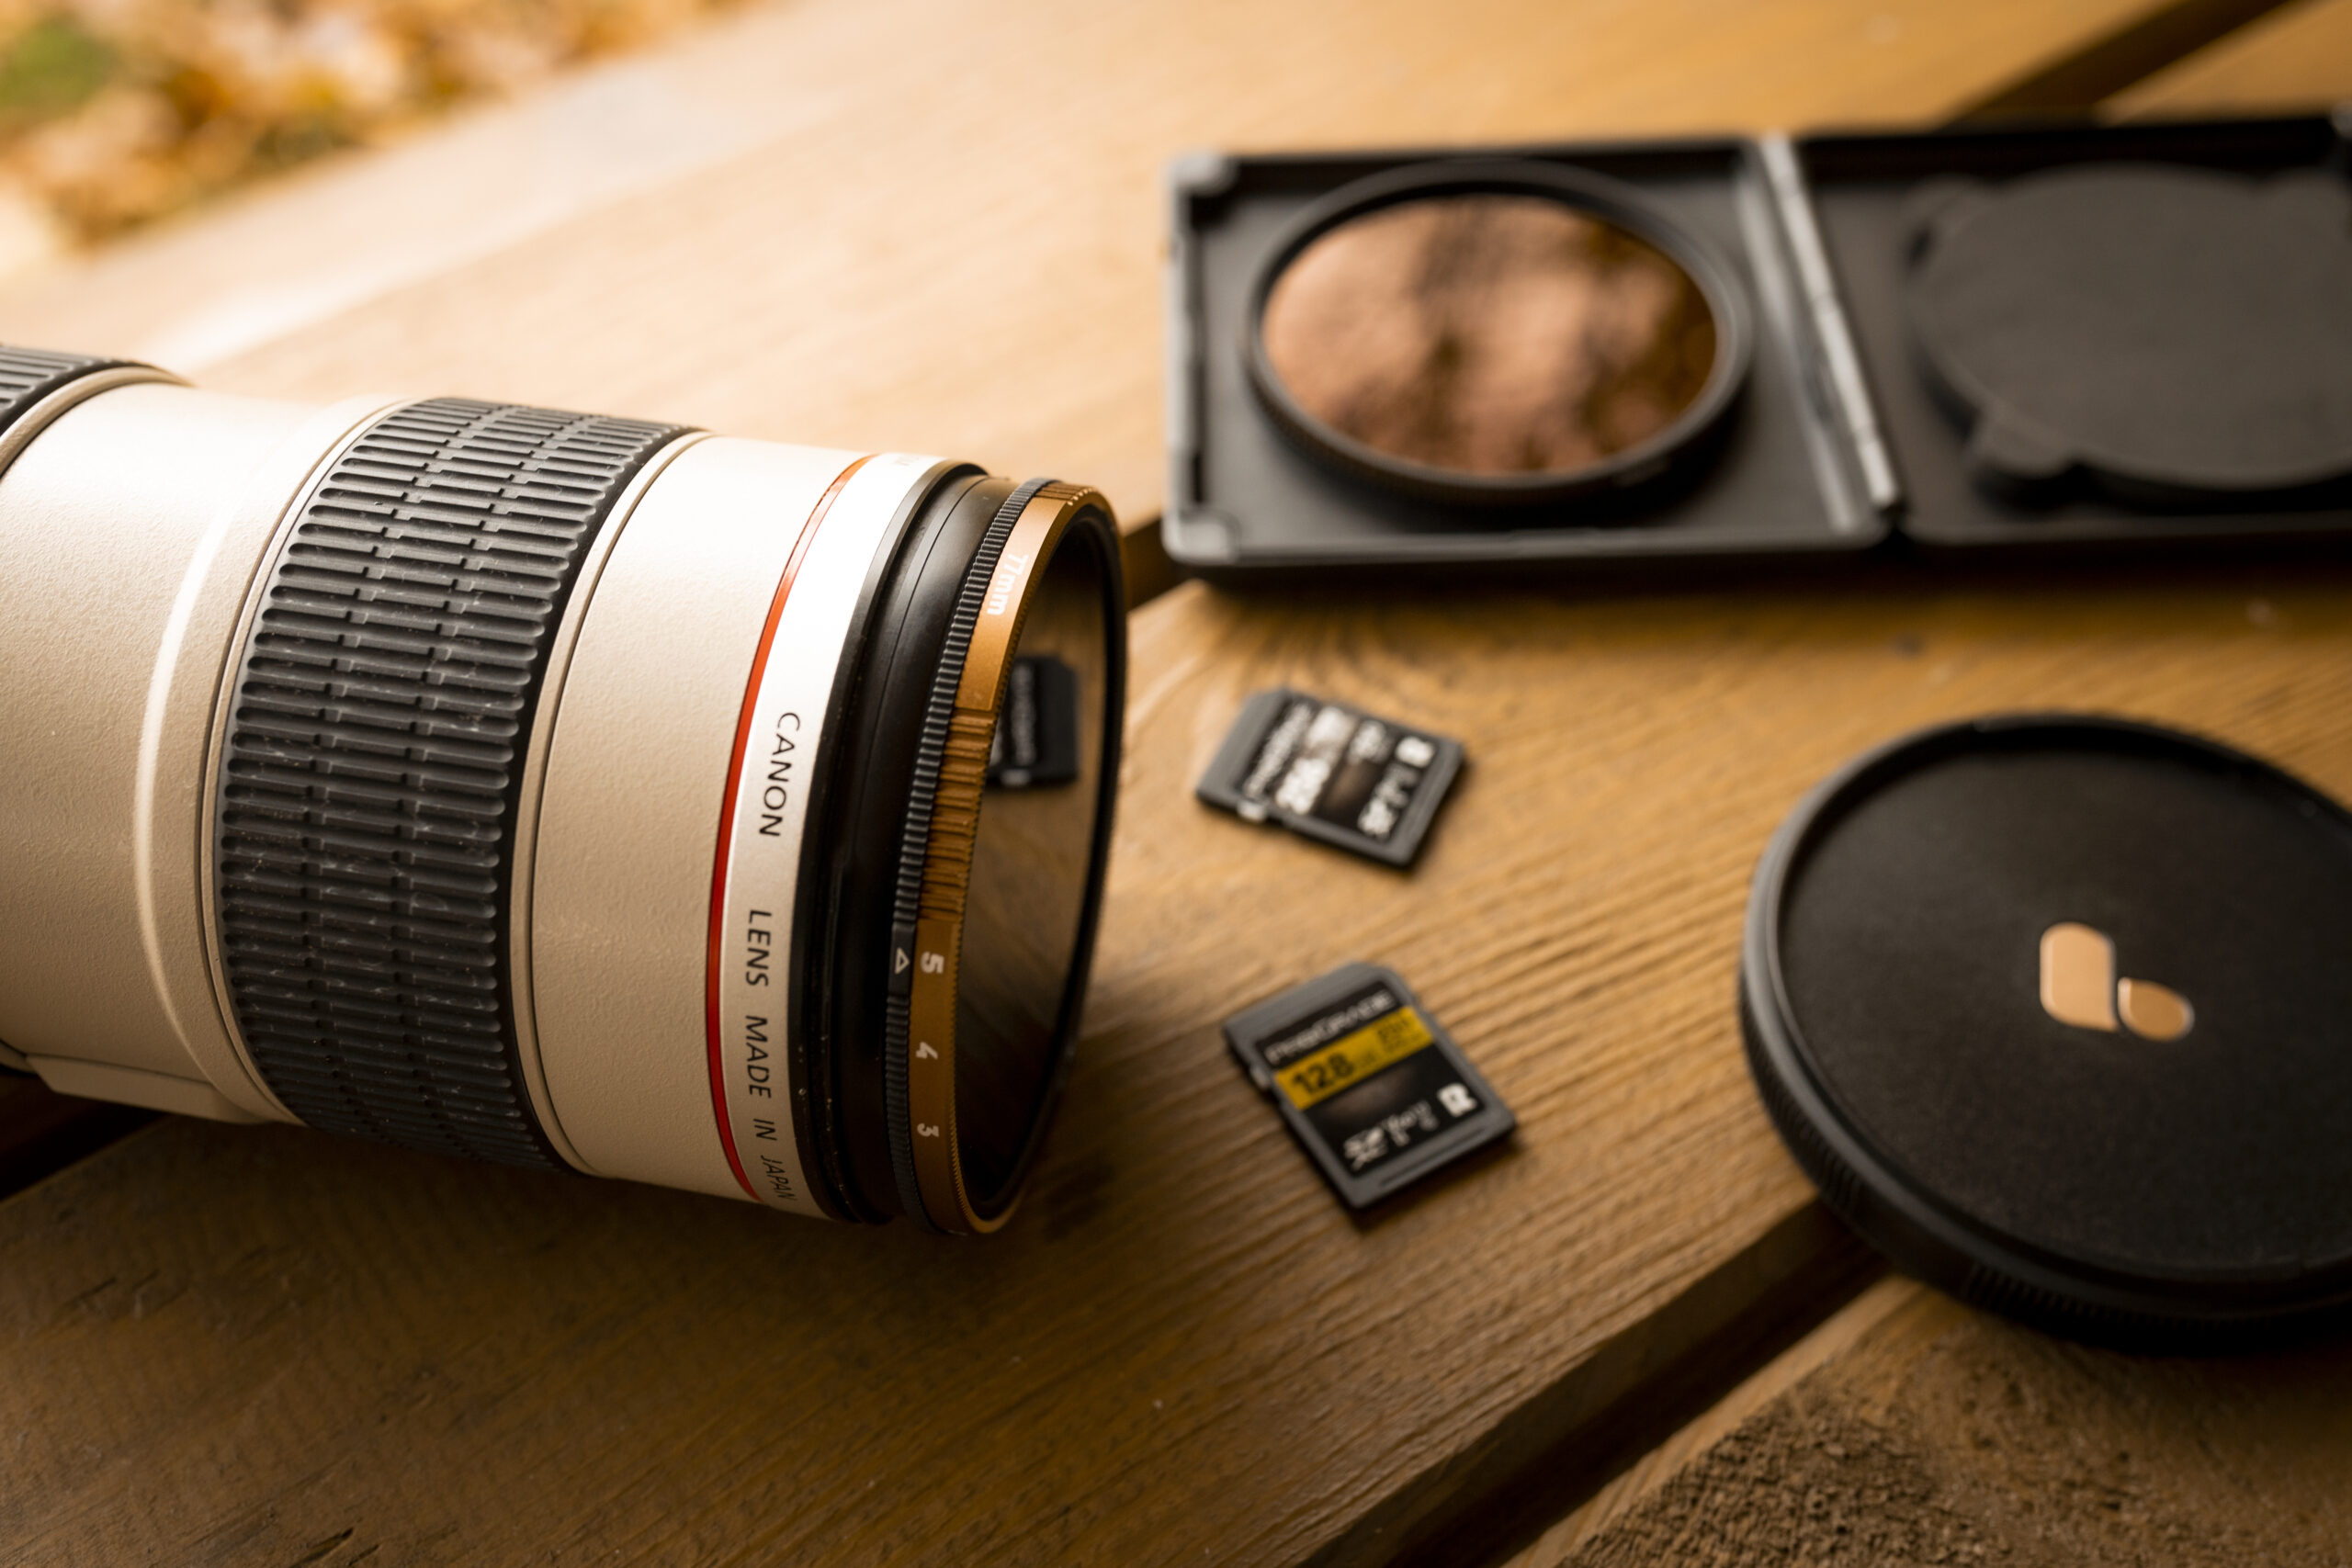 Lens Filters: When Do You Need Them and How to Choose the Right One?